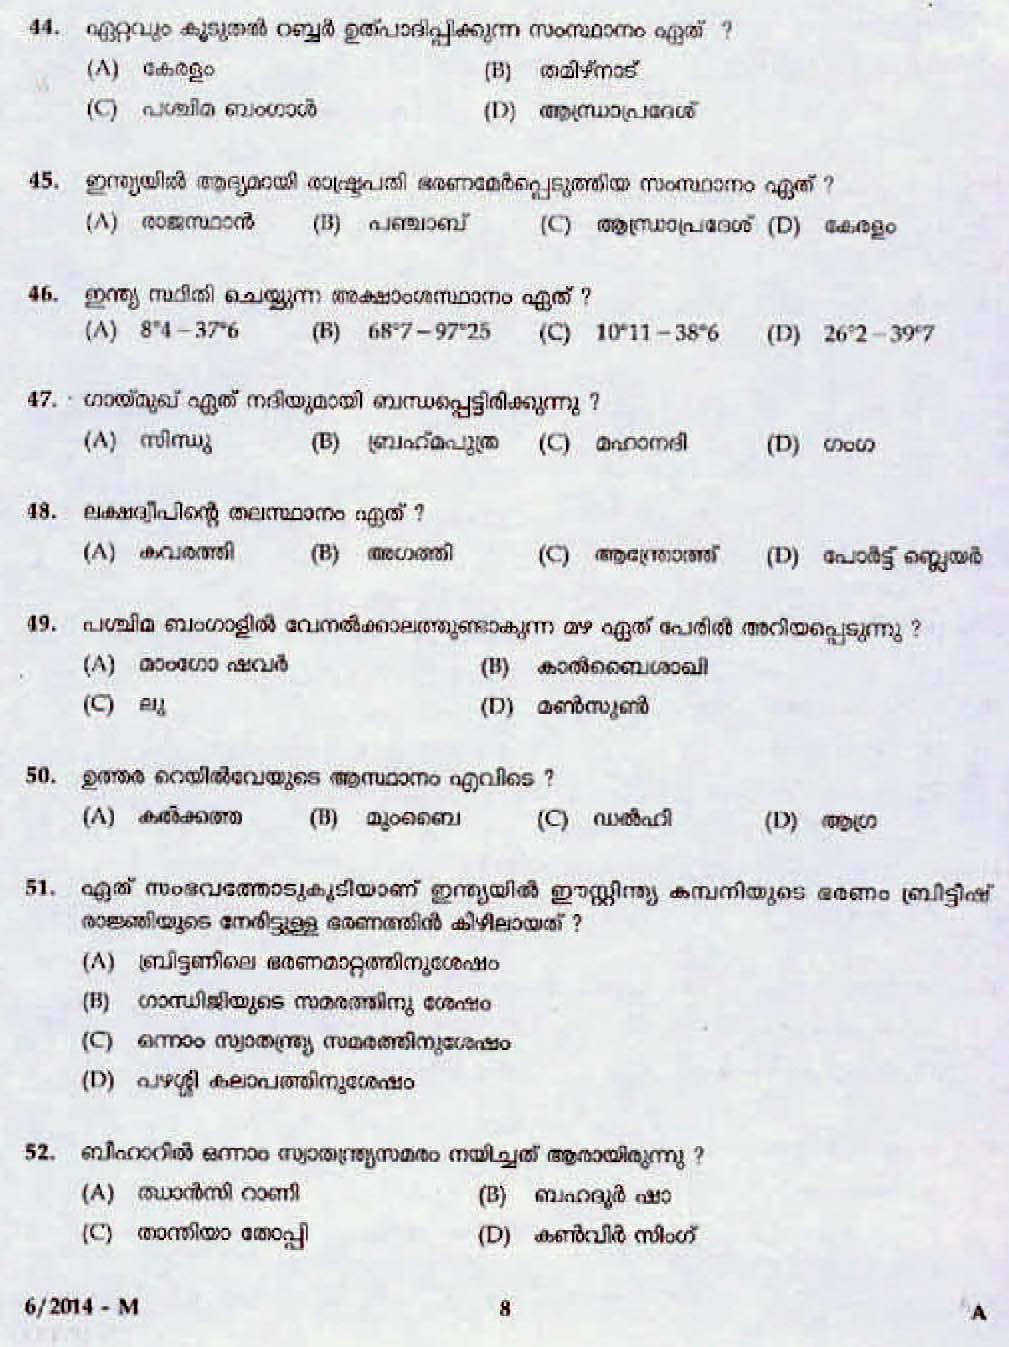 LD Clerk Question Paper Malayalam 2014 Paper Code 062014 M 6